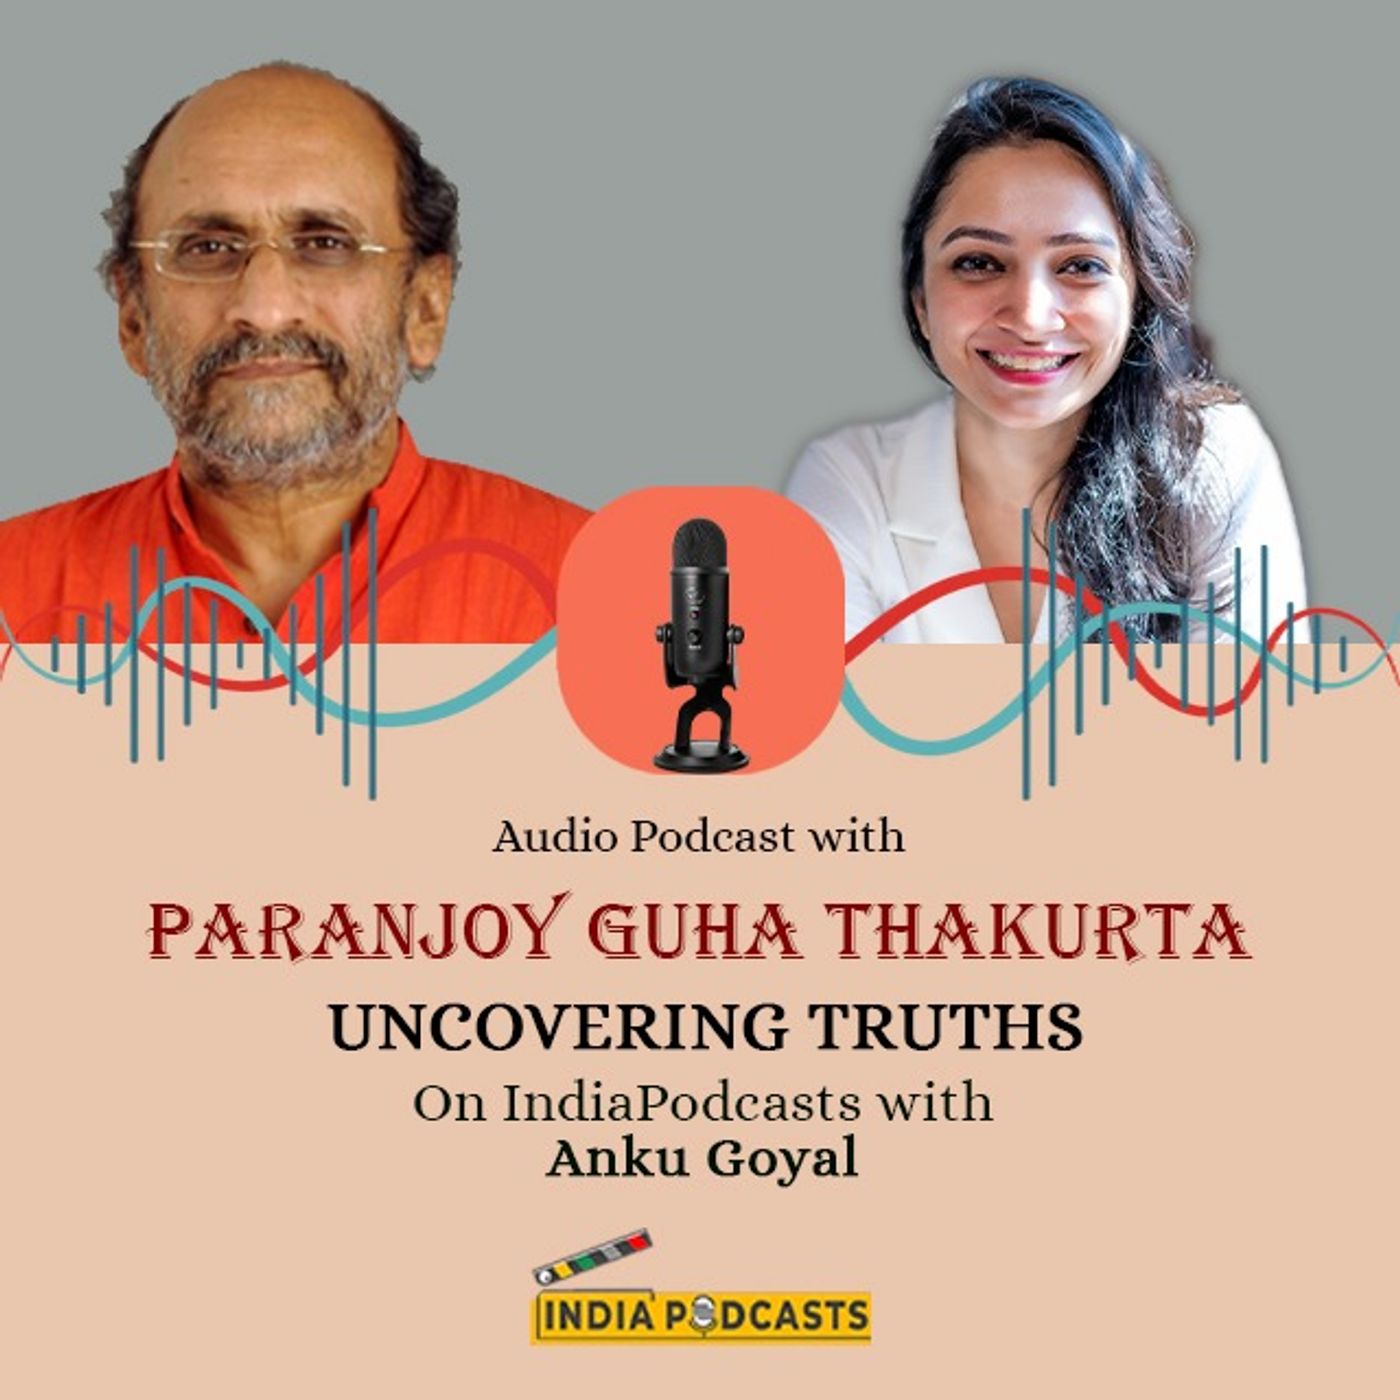 Speaking Truth to Power: An Interview with Paranjoy Guha Thakurta On IndiaPodcasts with Anku Goyal